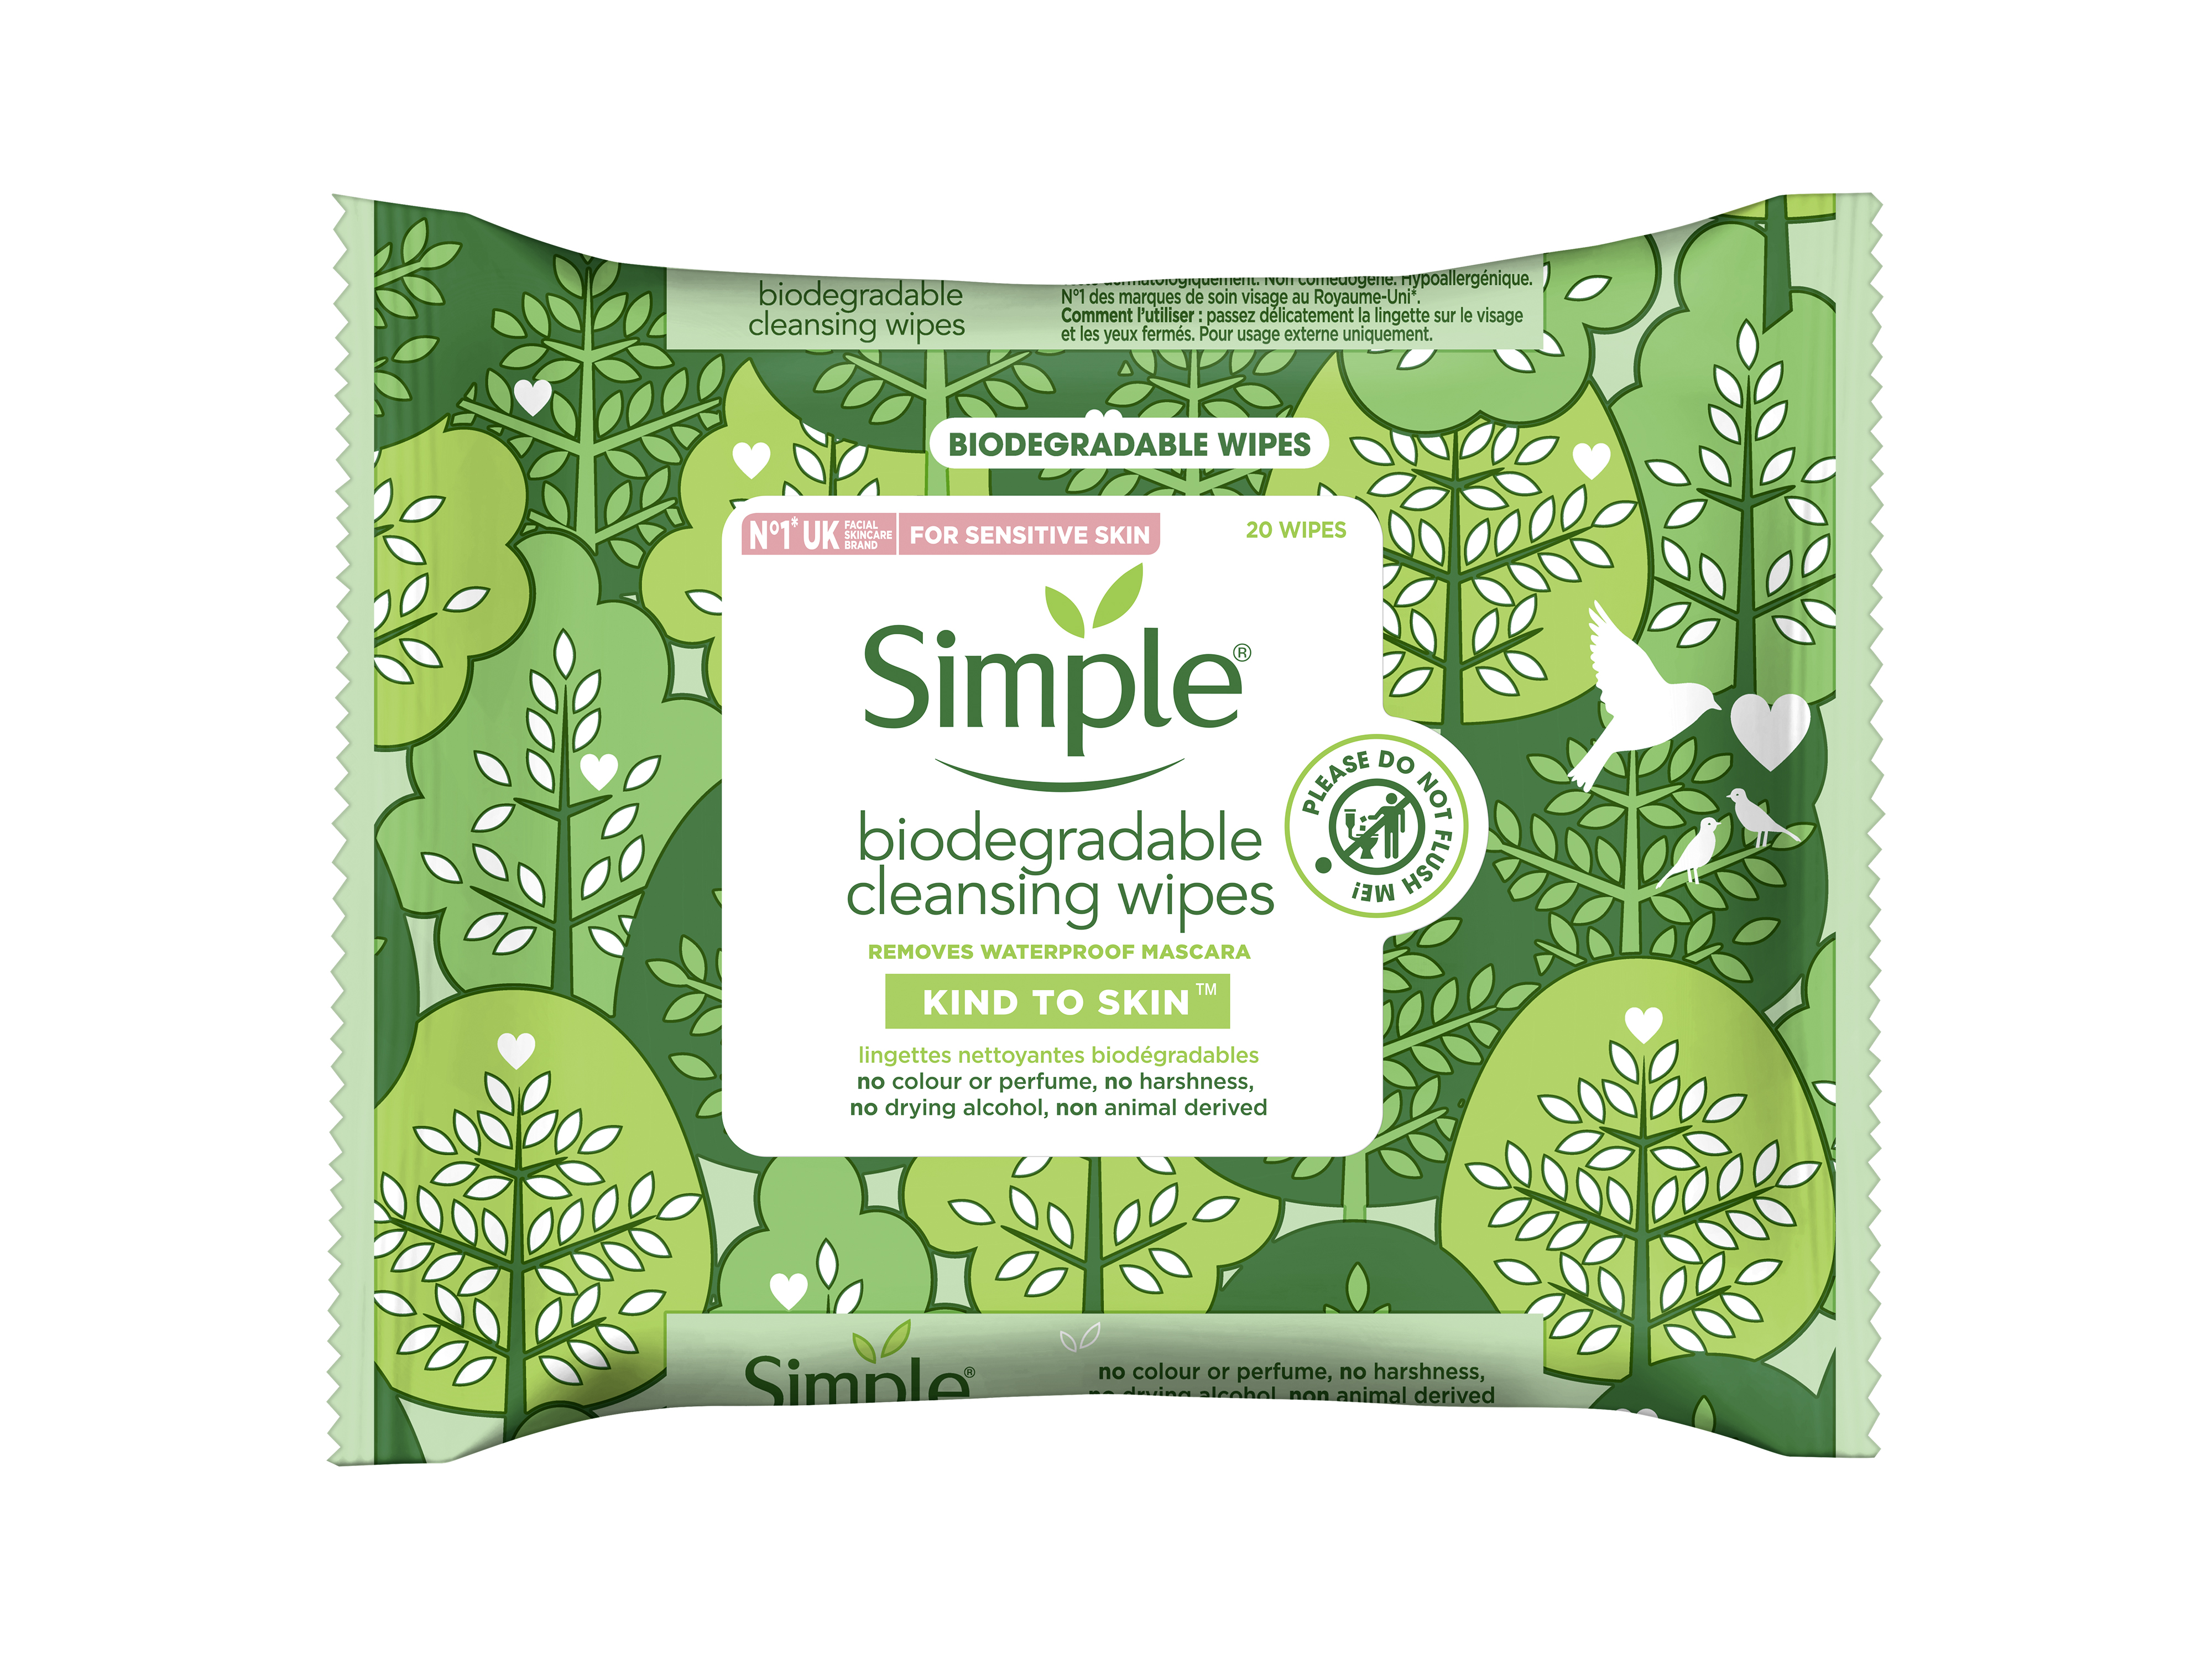 Simple Biodegradable Cleansing Wipes, 20 stk.